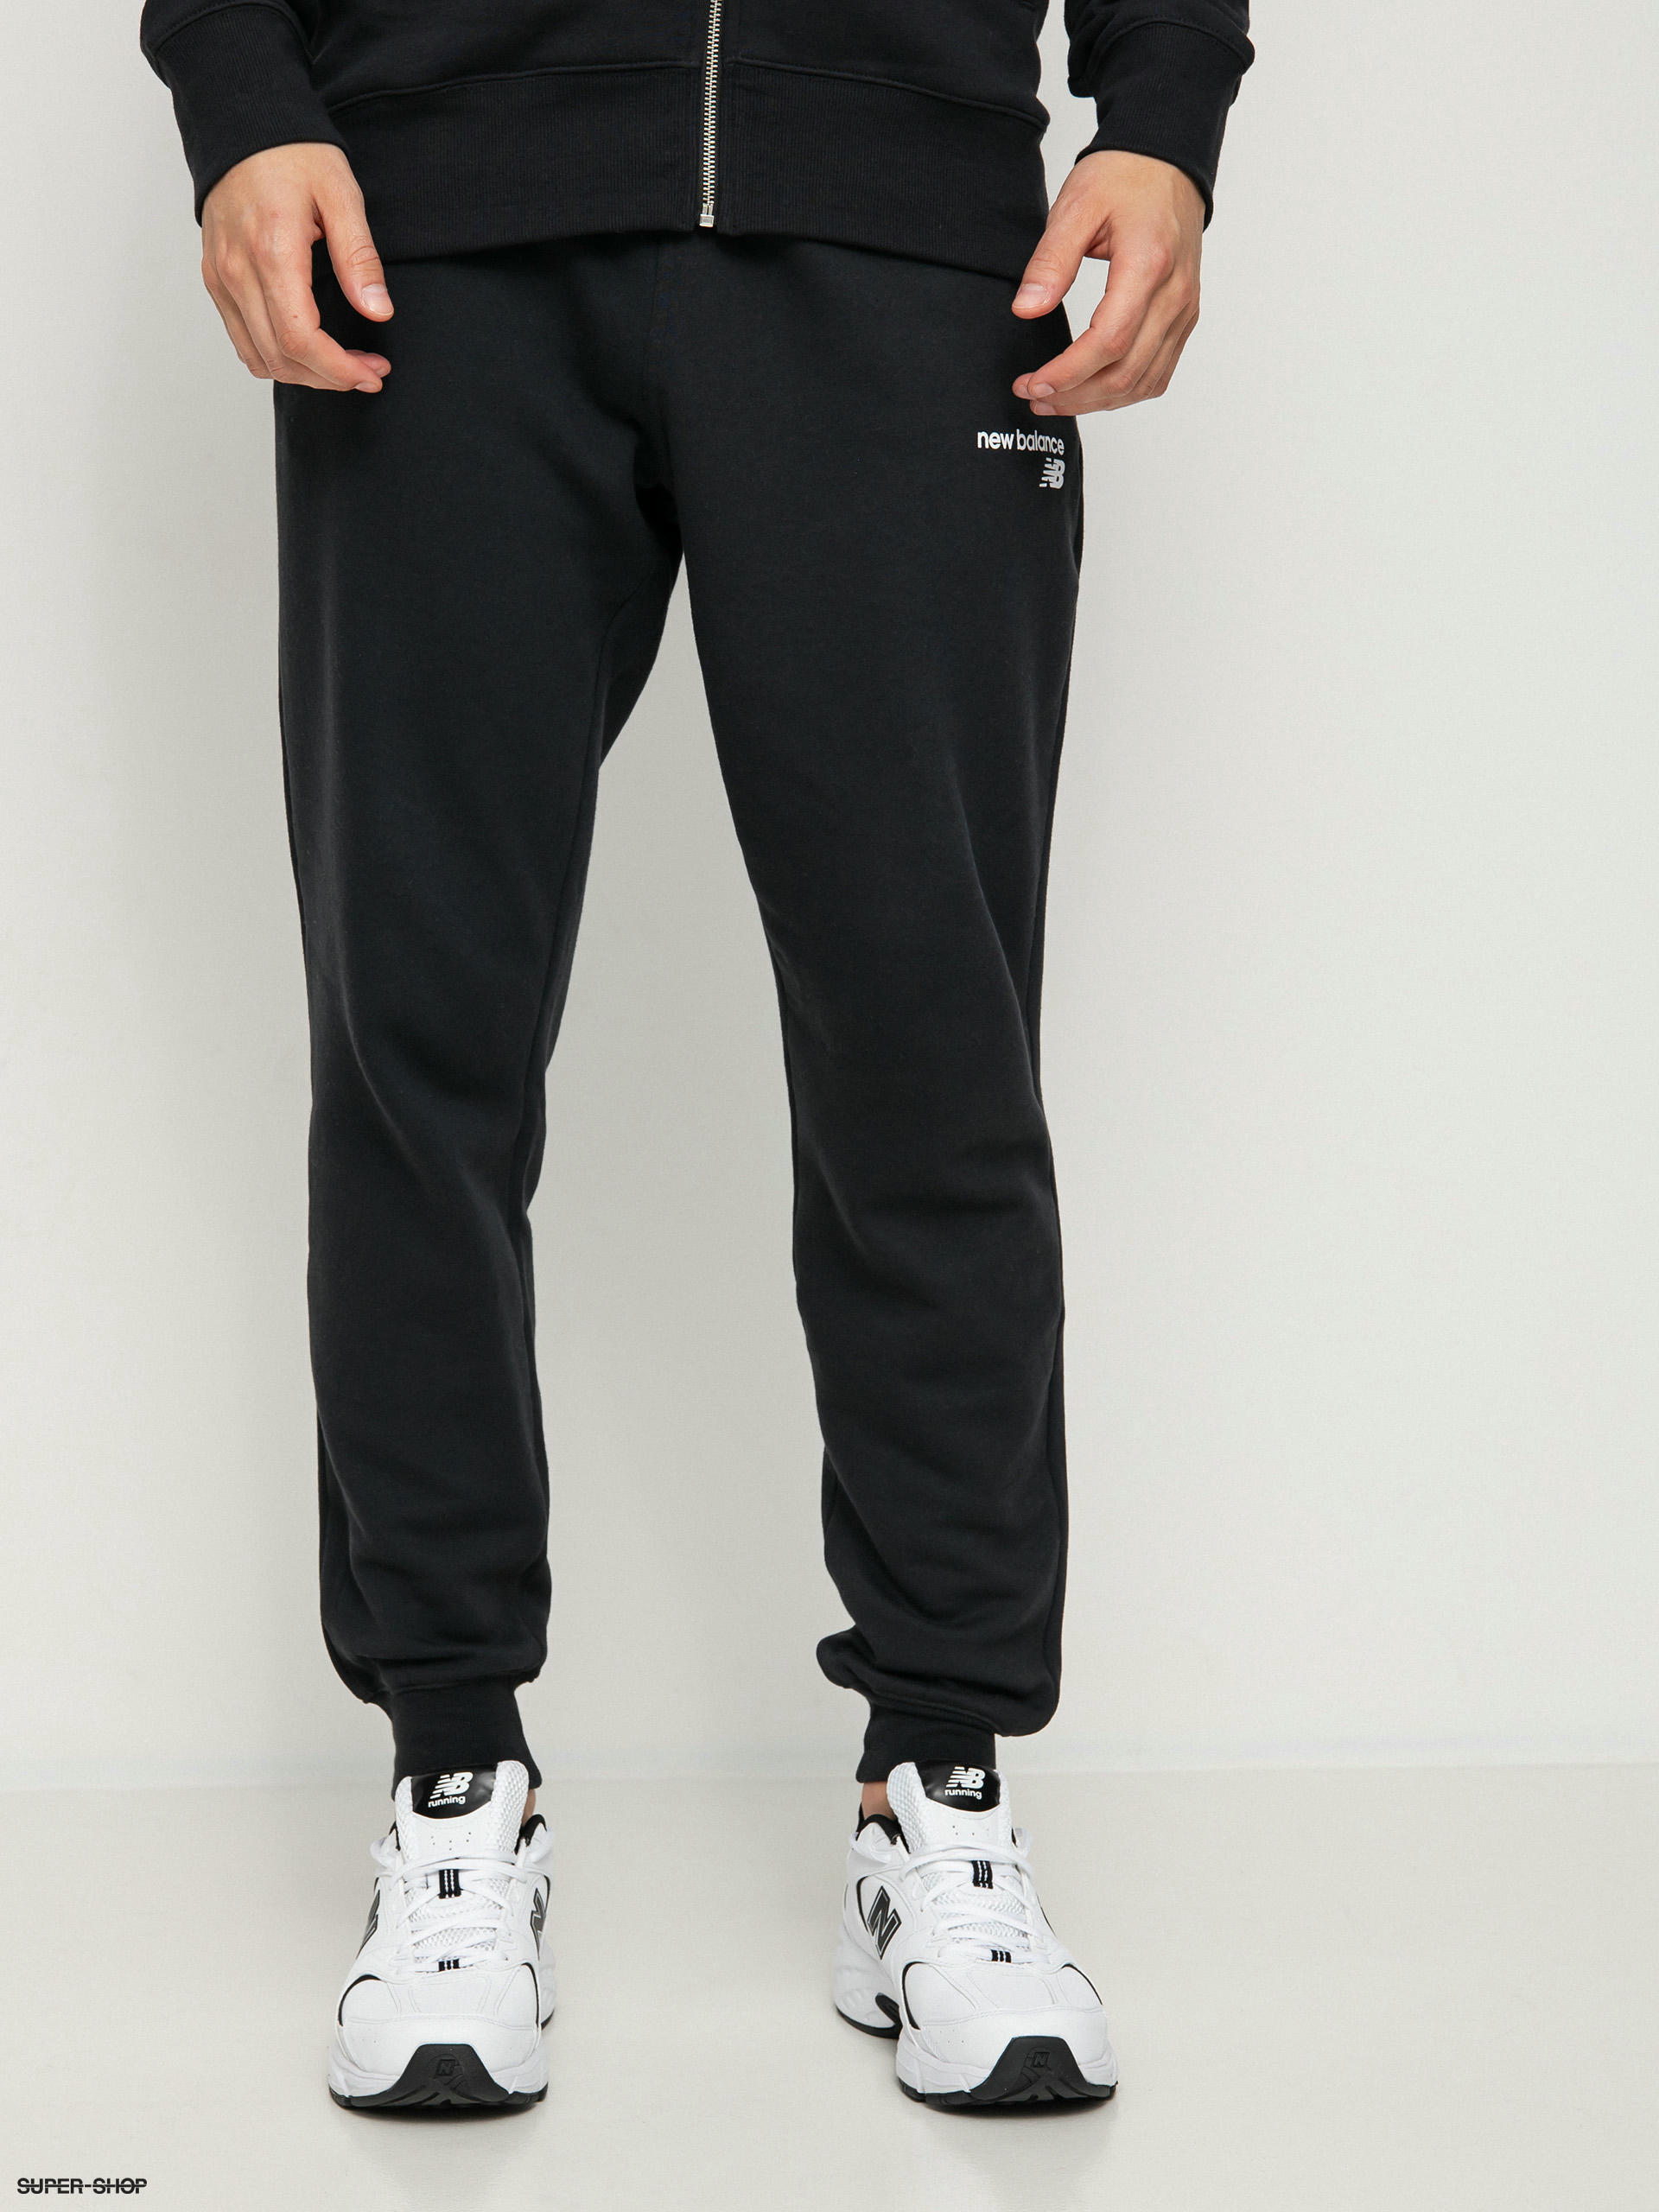 New Balance Track Pant x Rich Paul - Mp31565-nny - Sneakersnstuff (SNS) |  Sneakersnstuff (SNS)